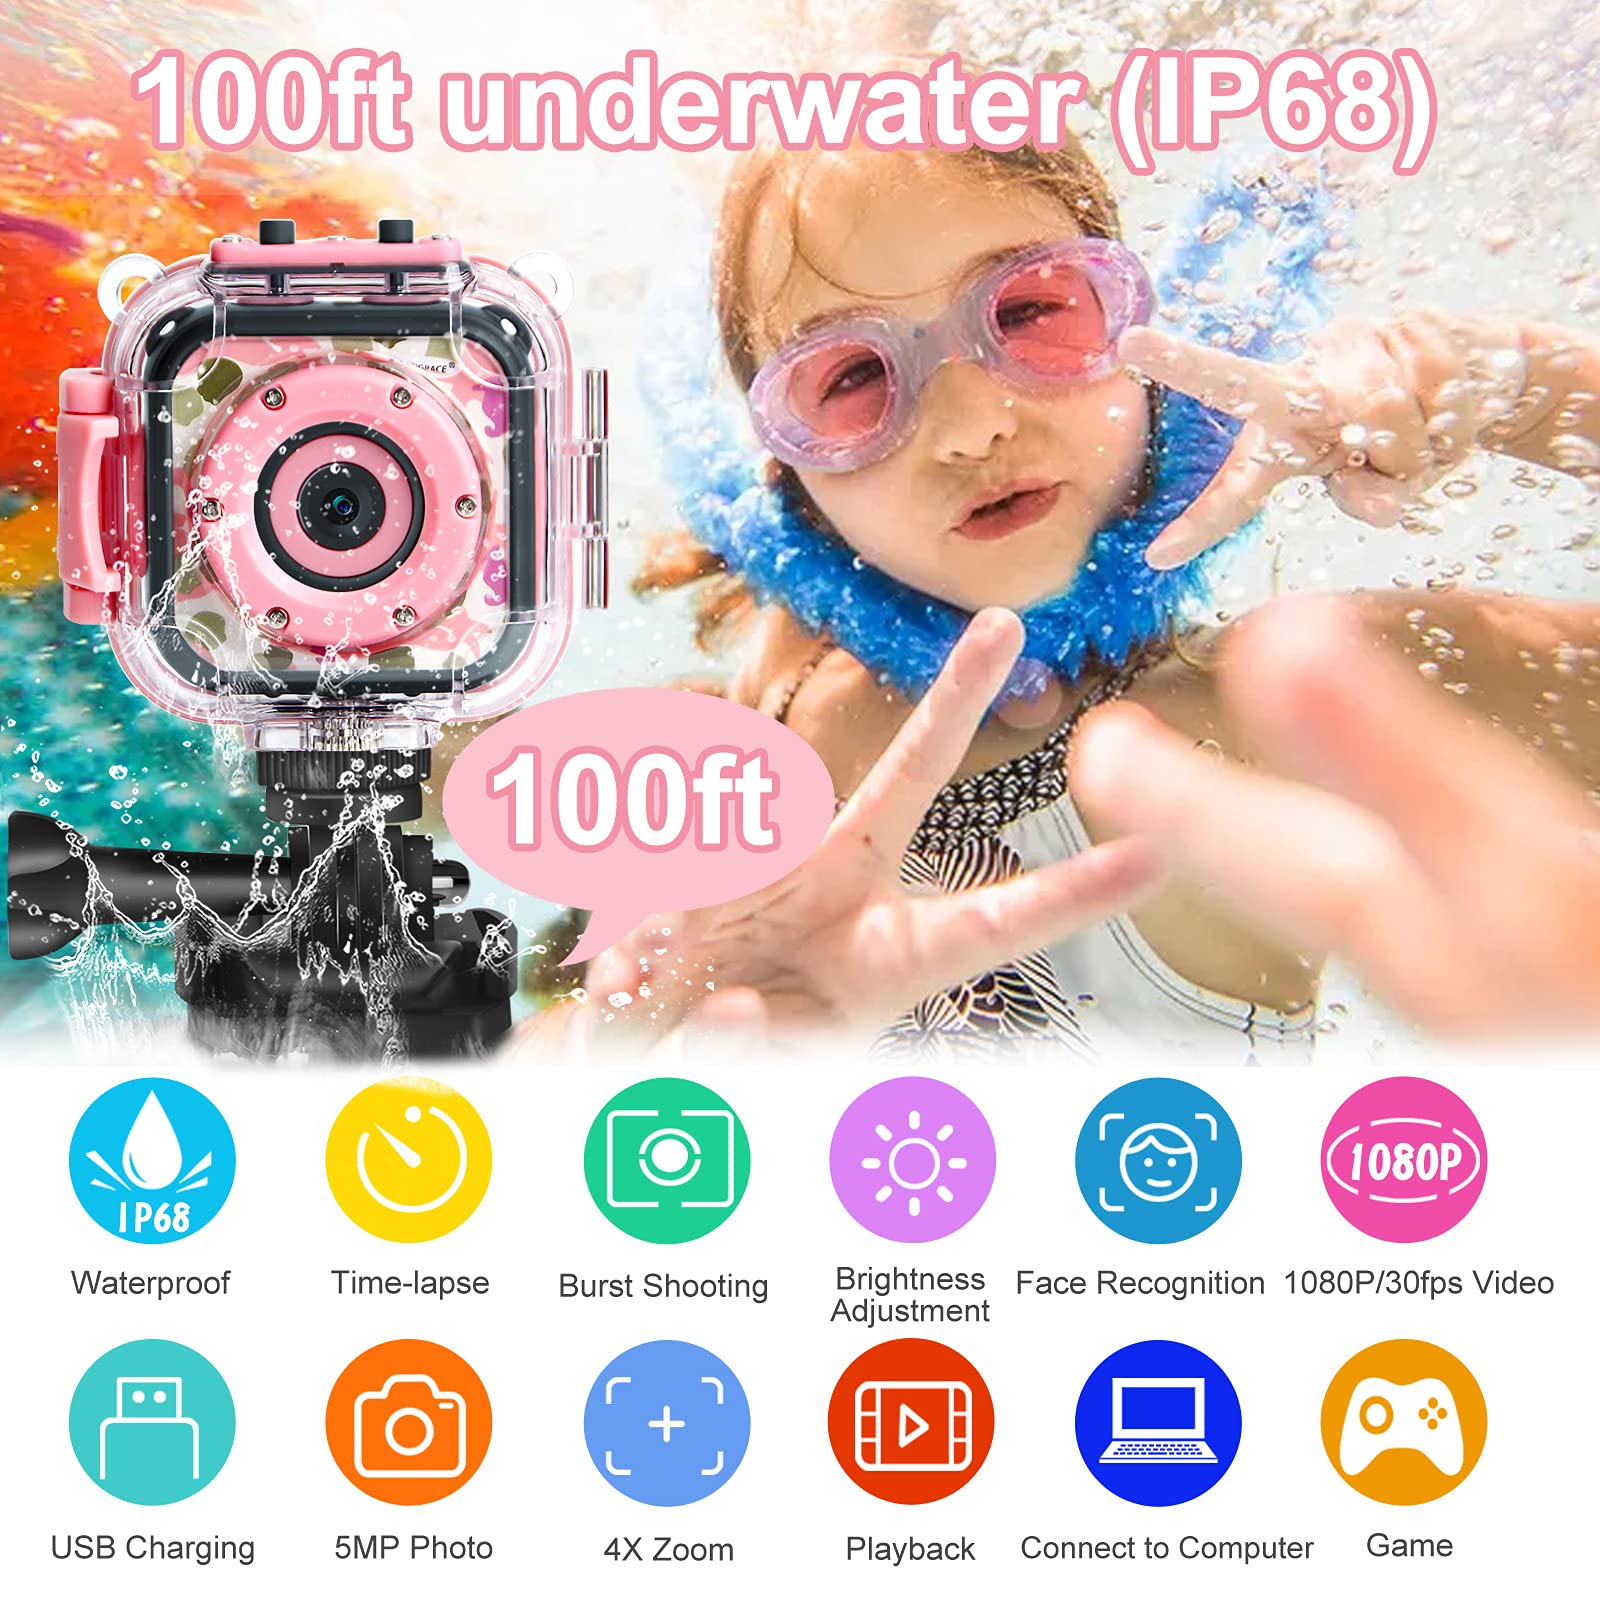 PROGRACE Kids Camera Waterproof Gift Toy - Children Digital Video Camera Underwater Camera for Kids 1080P Camcorder DV Toddler Camera for Girls Birthday Learn Camera Pool Toys Age 3-14